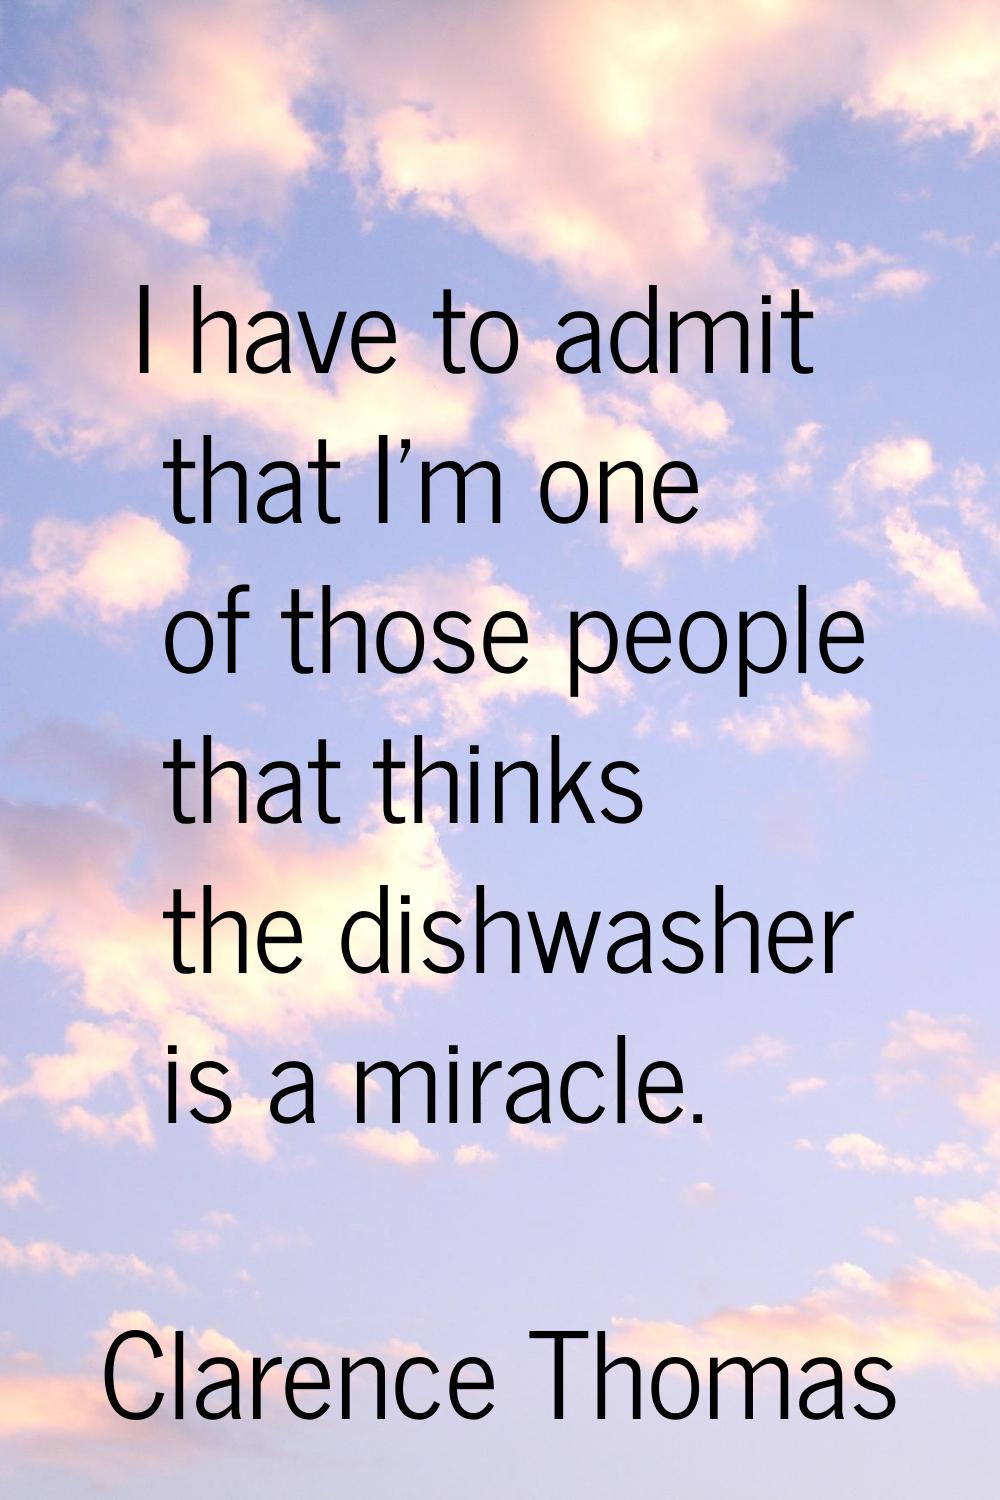 I have to admit that I'm one of those people that thinks the dishwasher is a miracle.